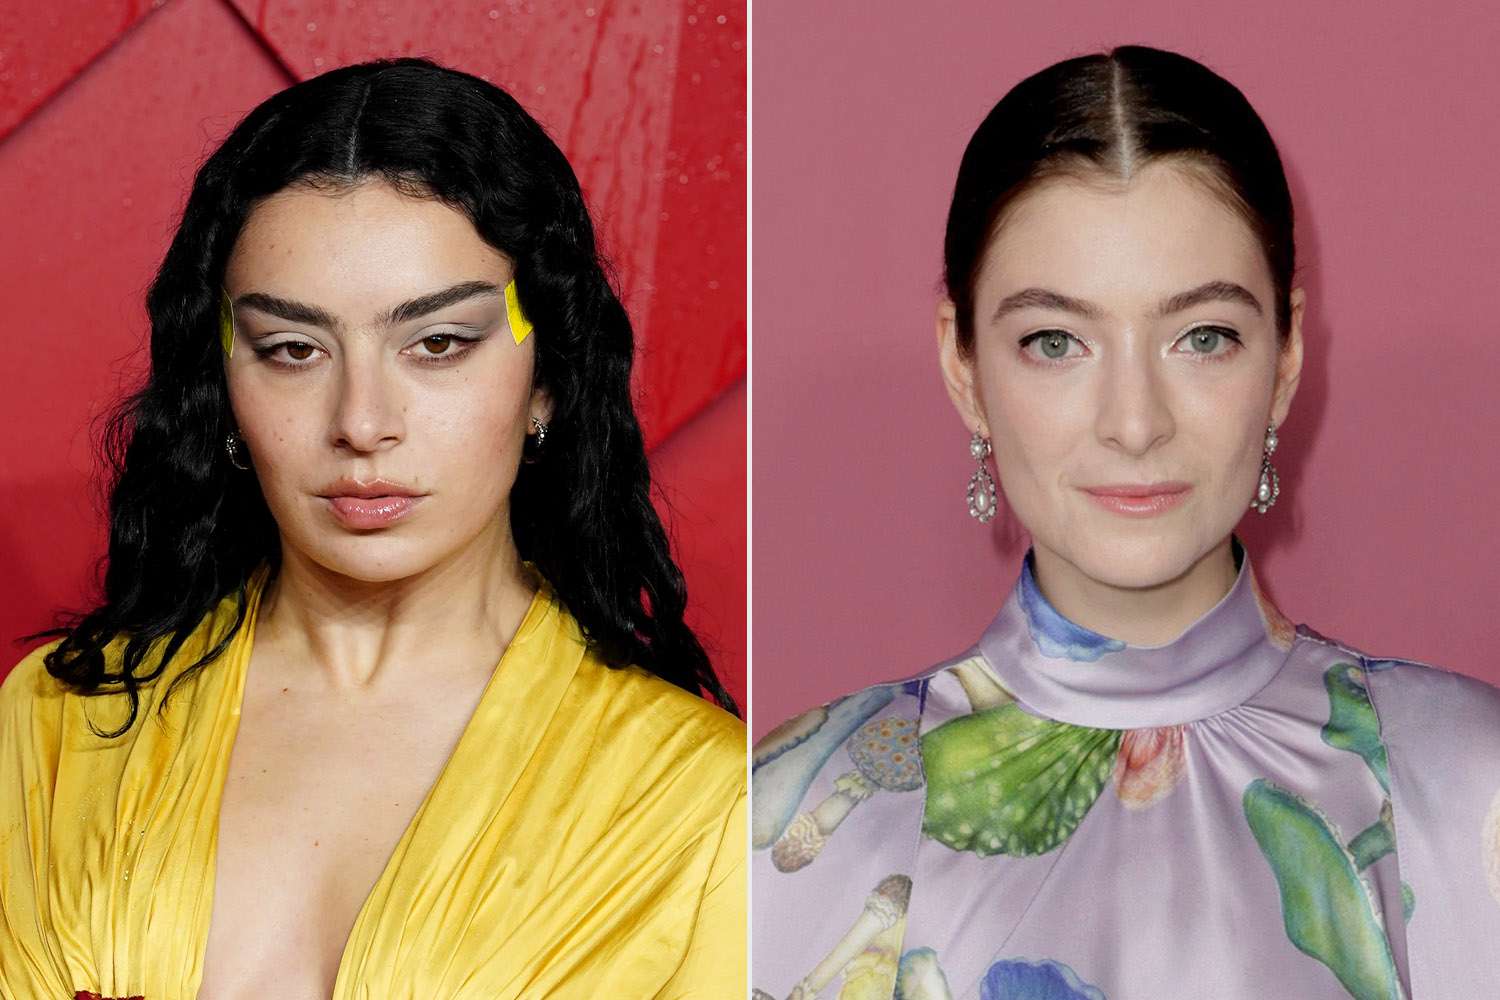 Charli XCX Recalls Feeling 'Super Jealous' of Lorde's Early Success and Thinking 'That Could Have Been Me'